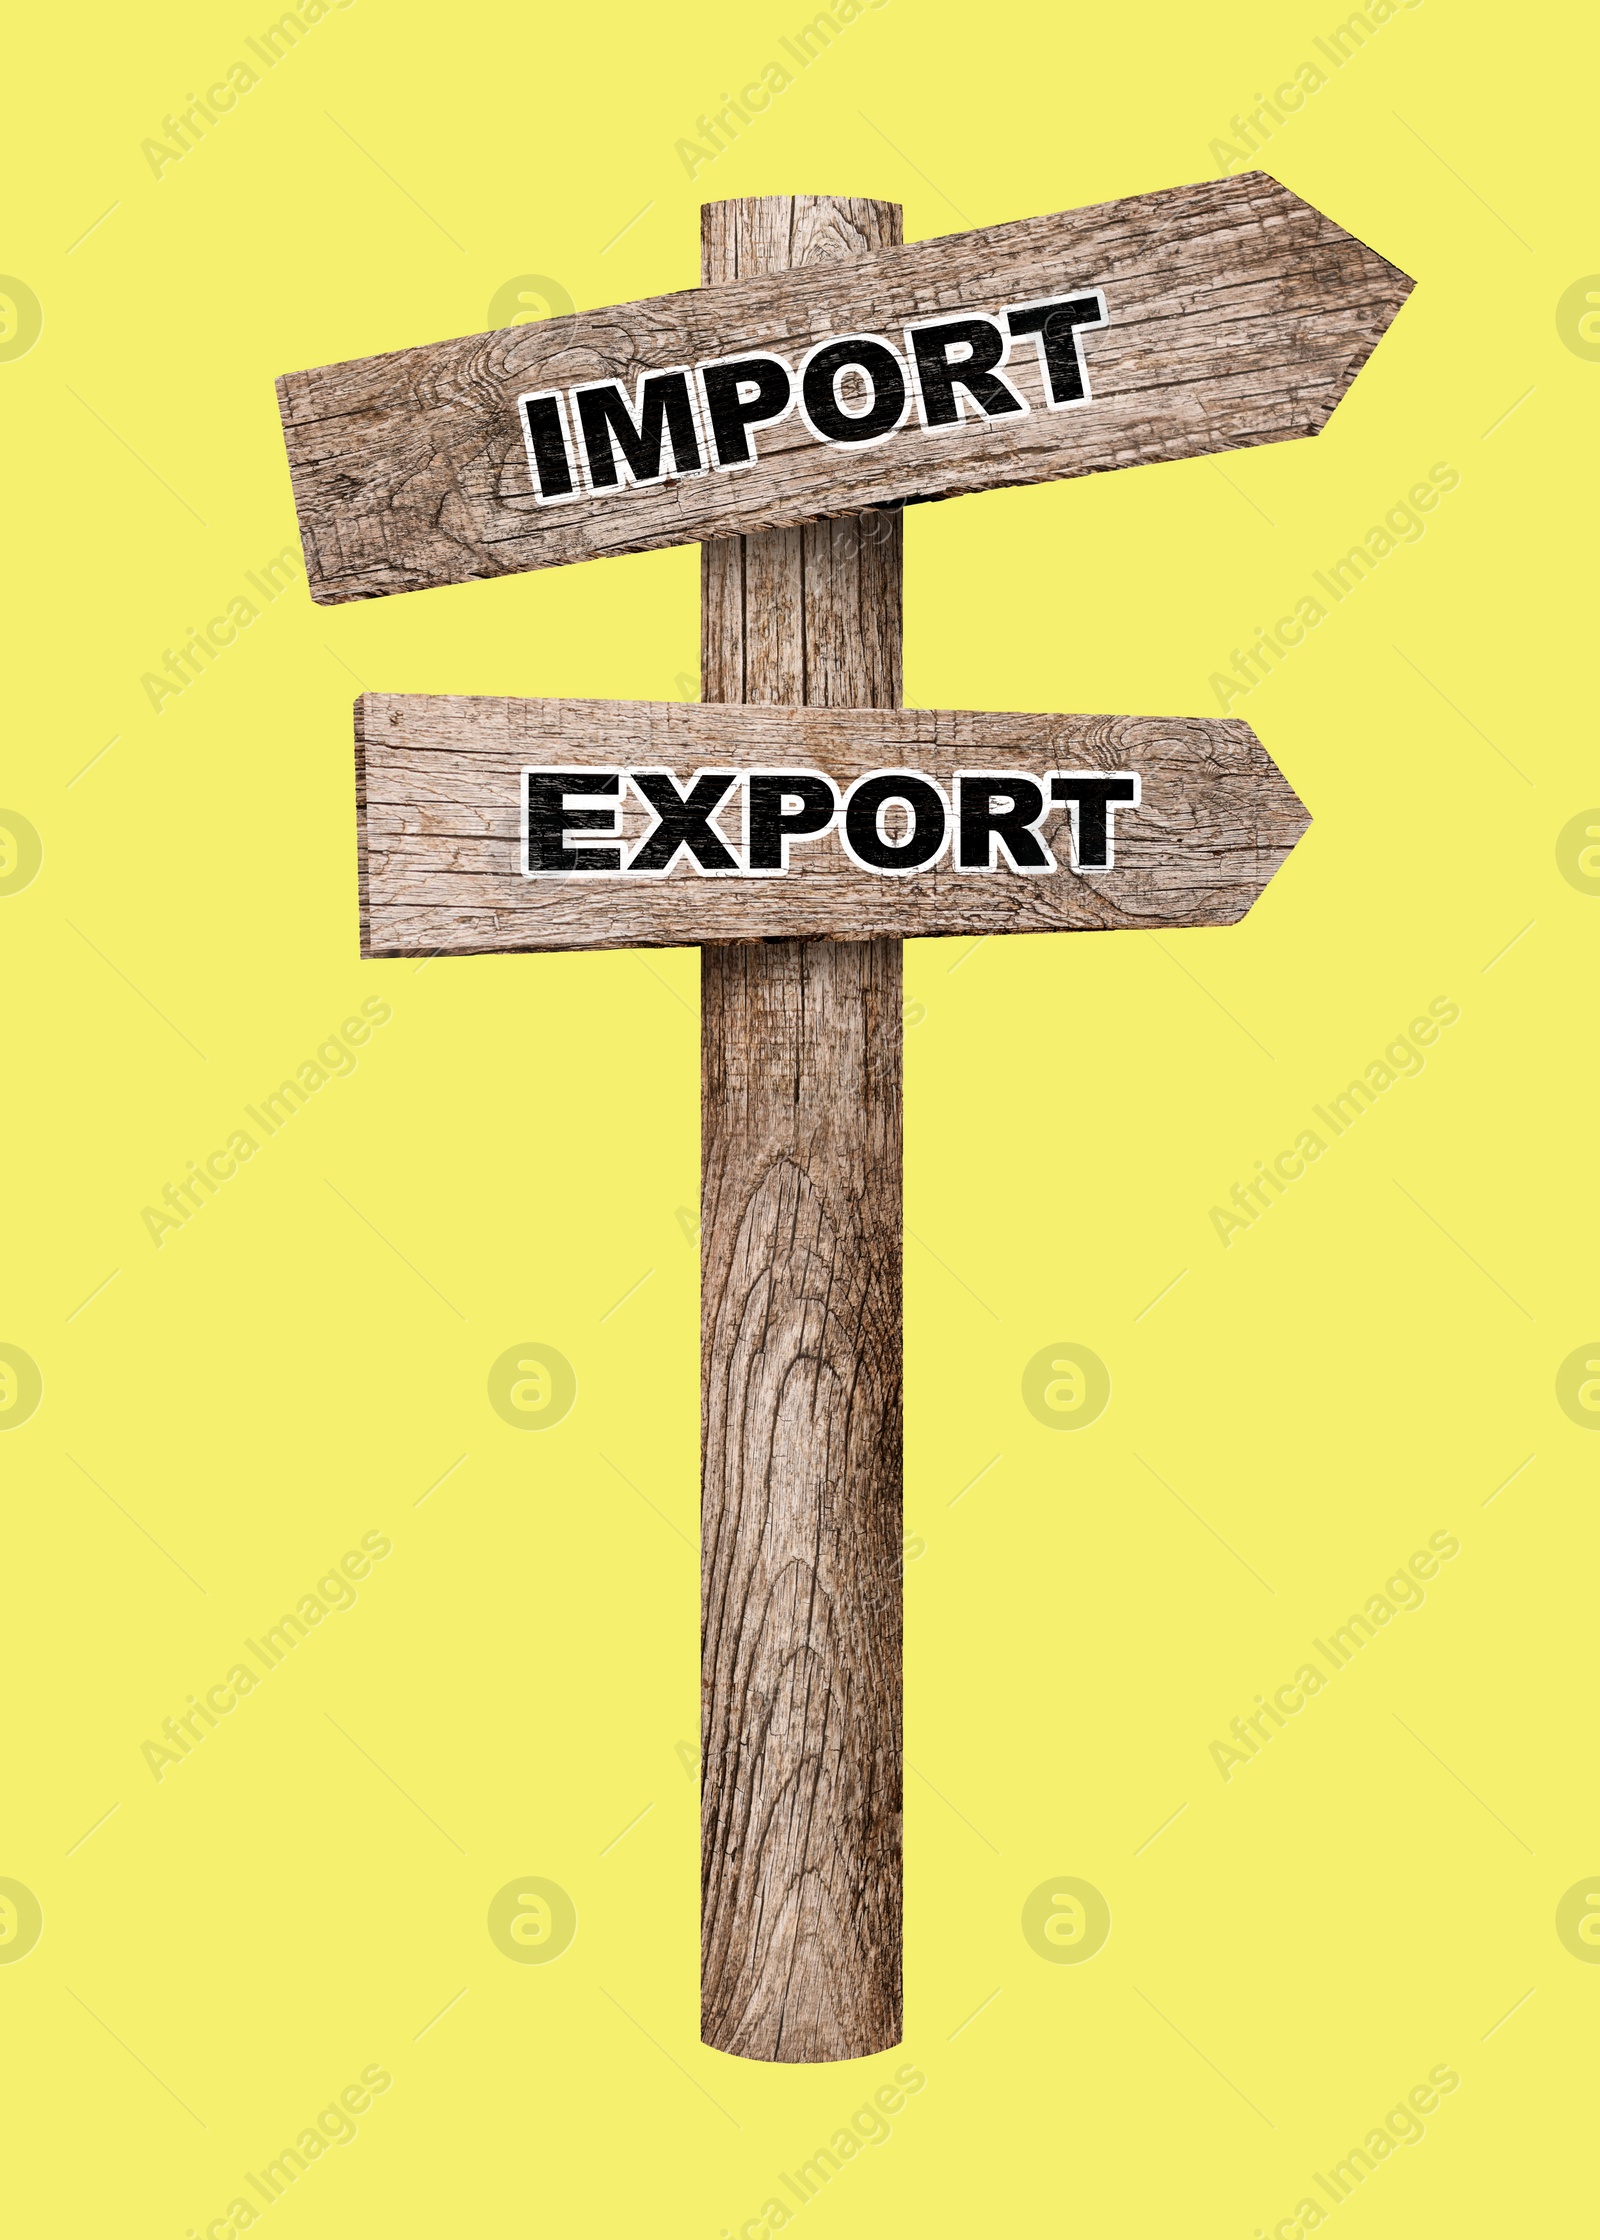 Illustration of Import Export arrow shaped wooden road sign on yellow background